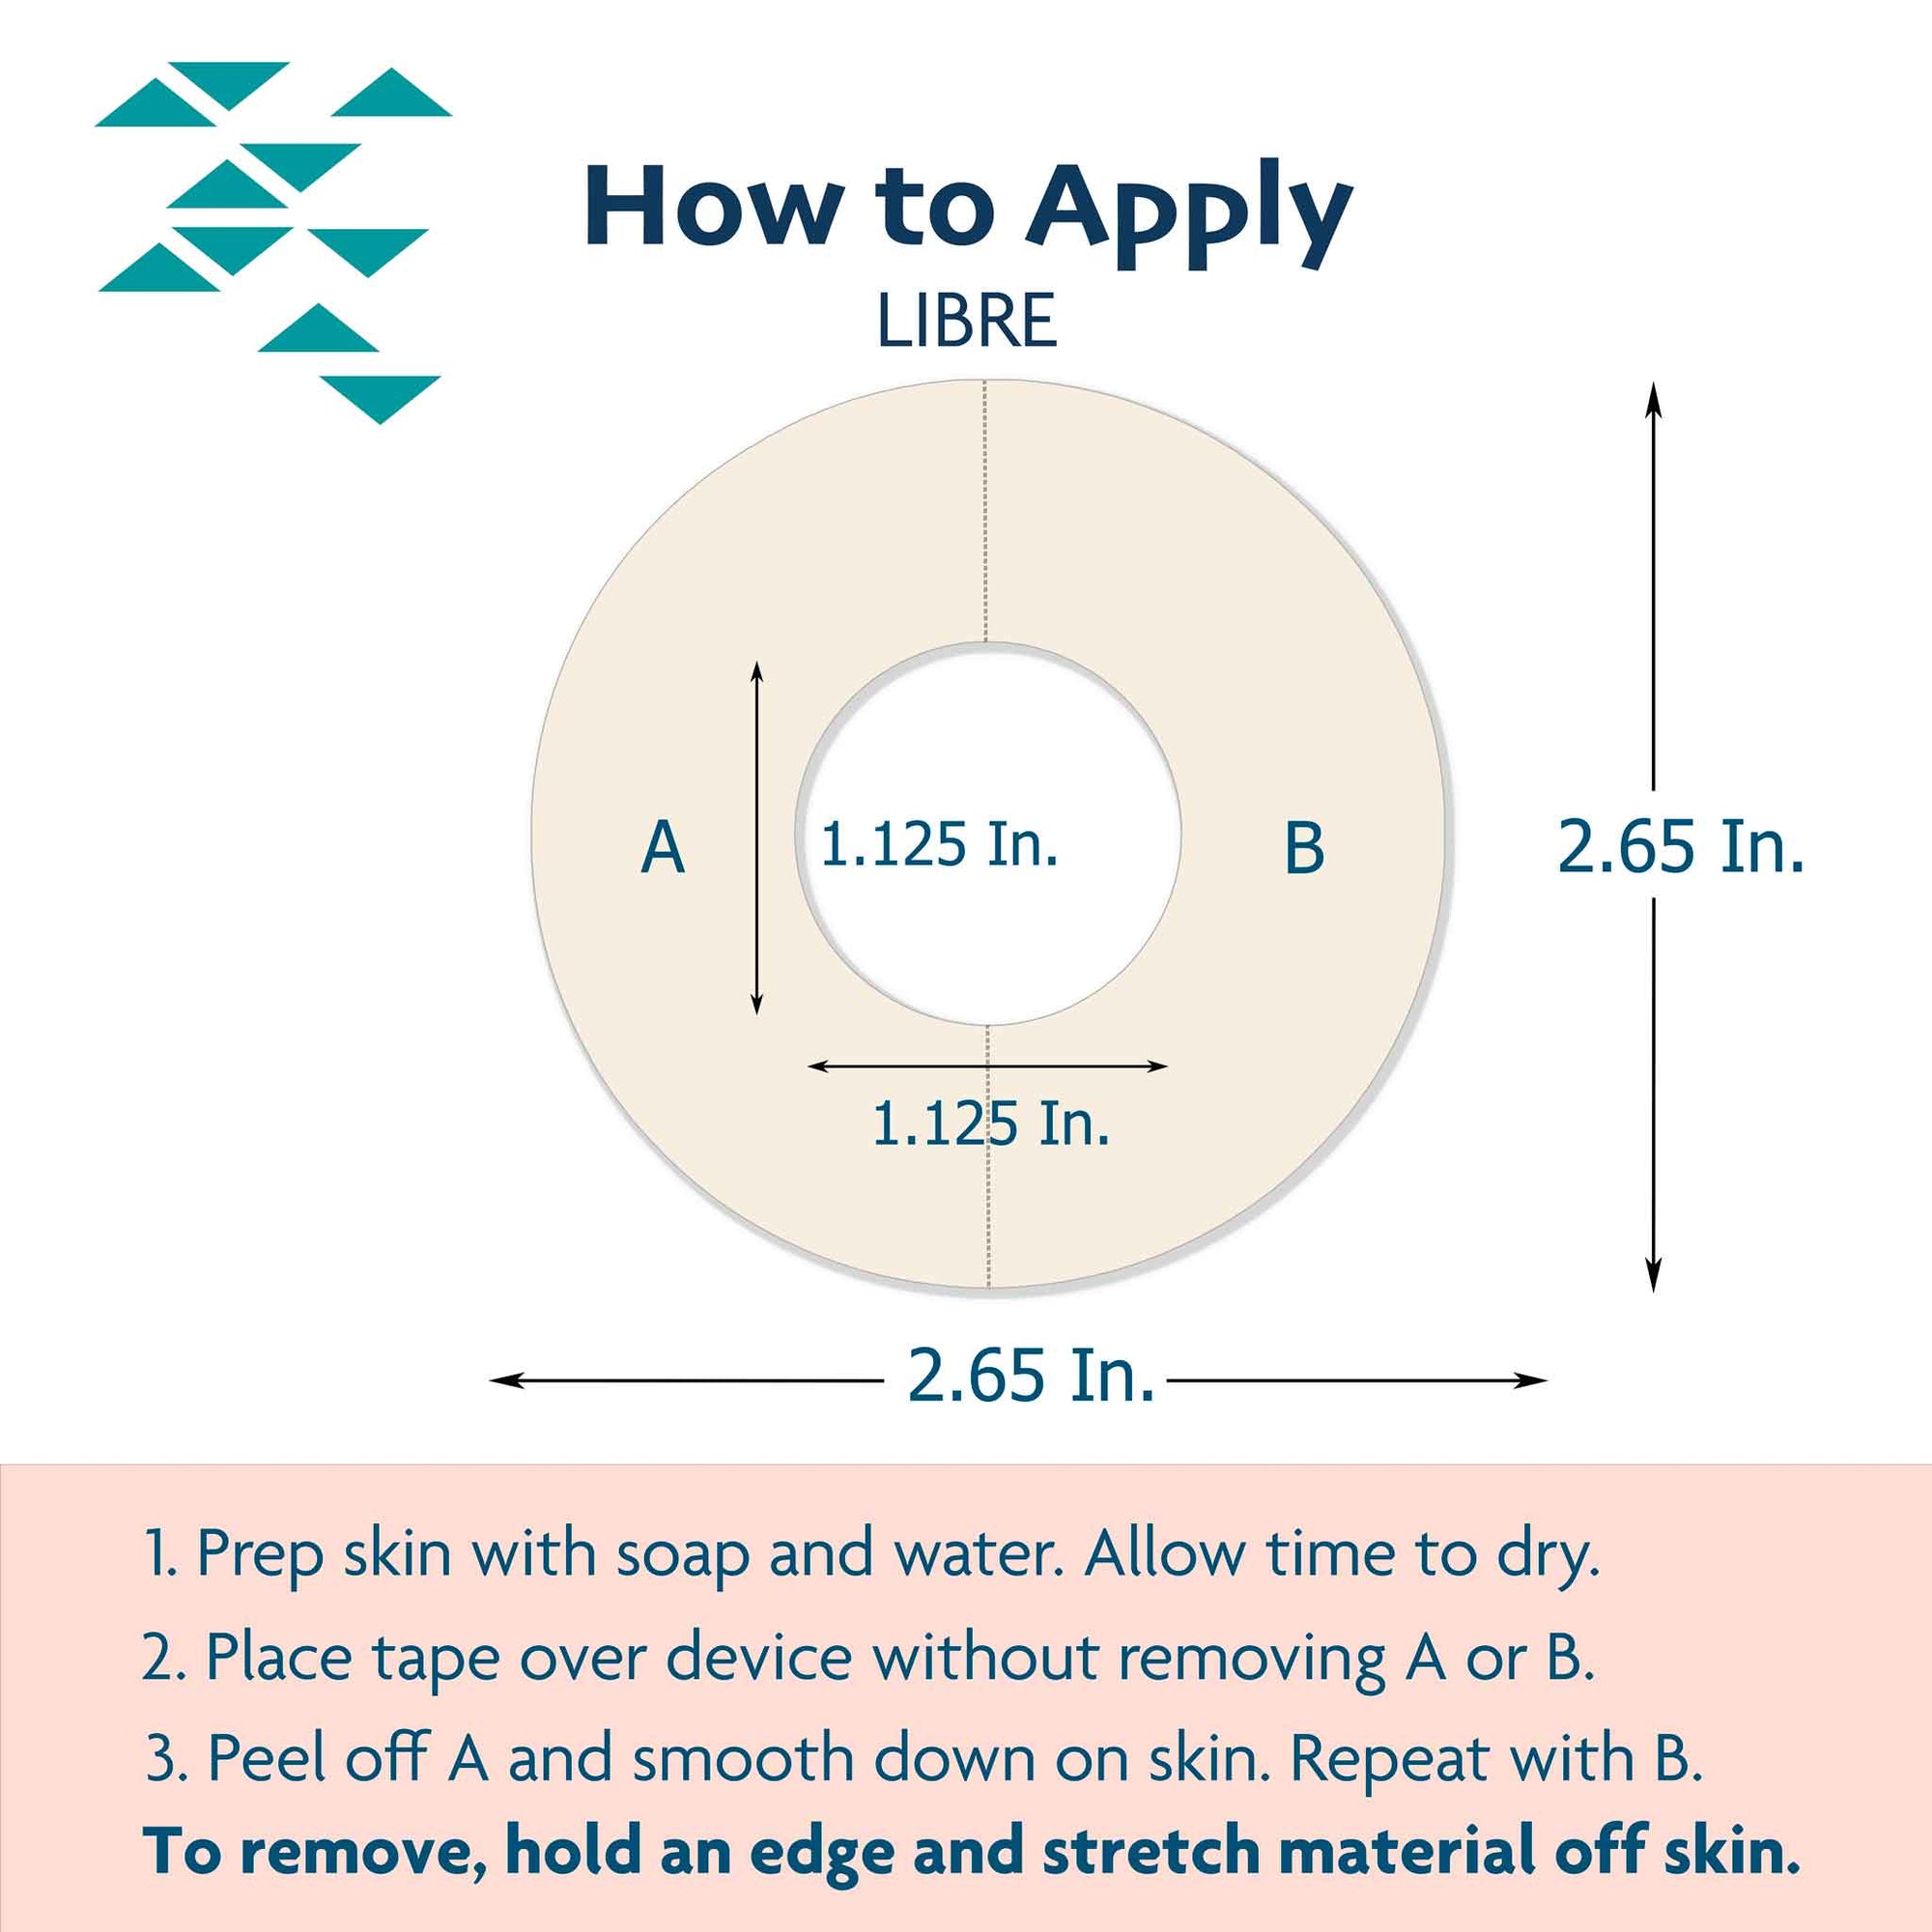 ExpressionMed Instructions to cover libre CGM properly, Abbott Lingo